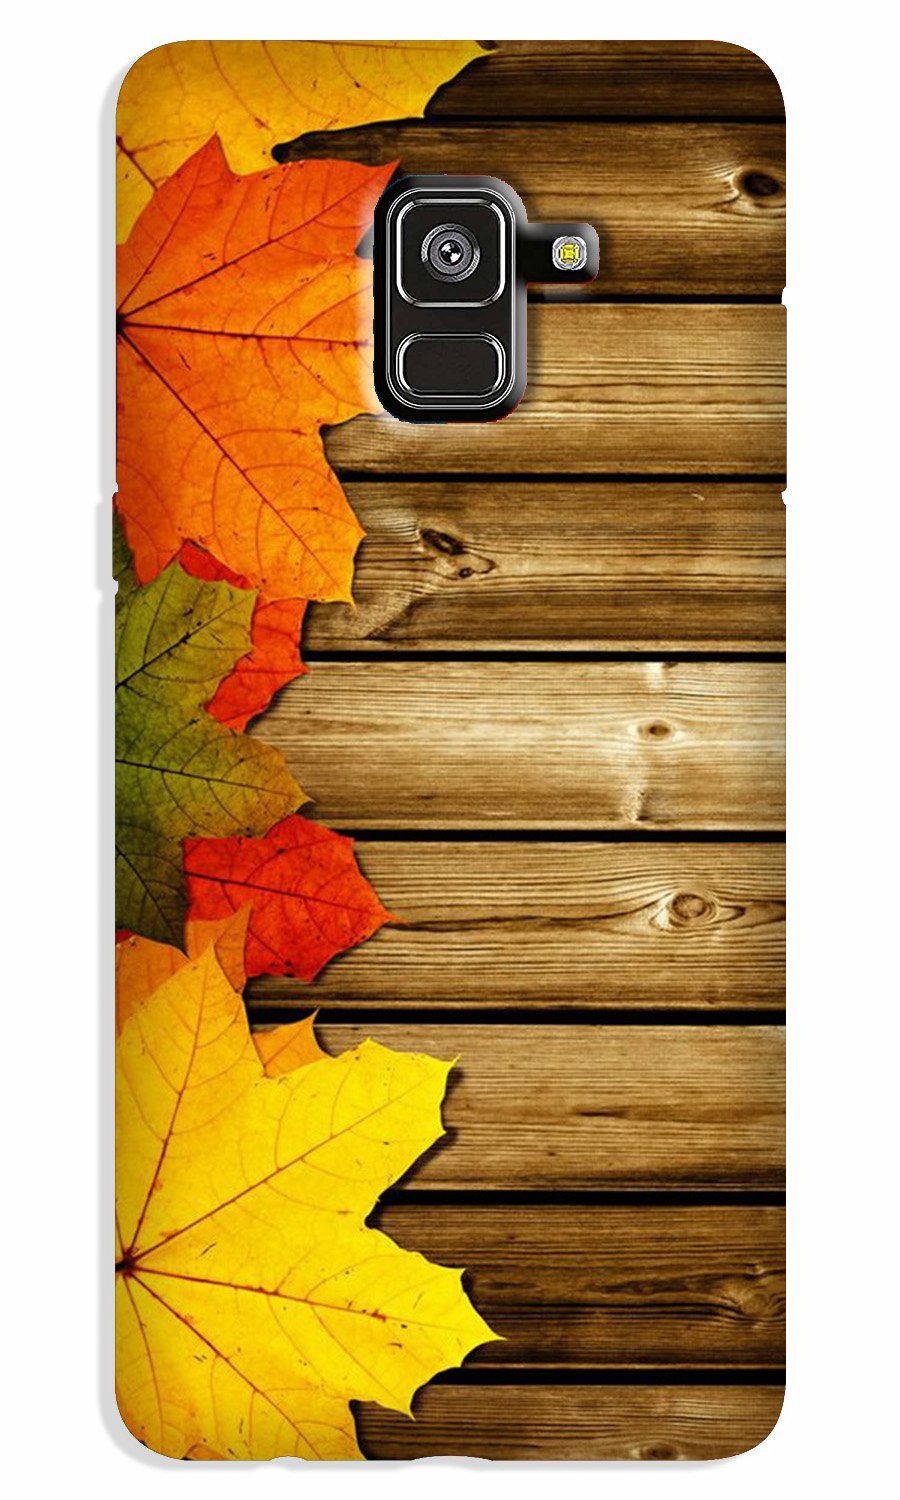 Wooden look3 Case for Galaxy A8 Plus